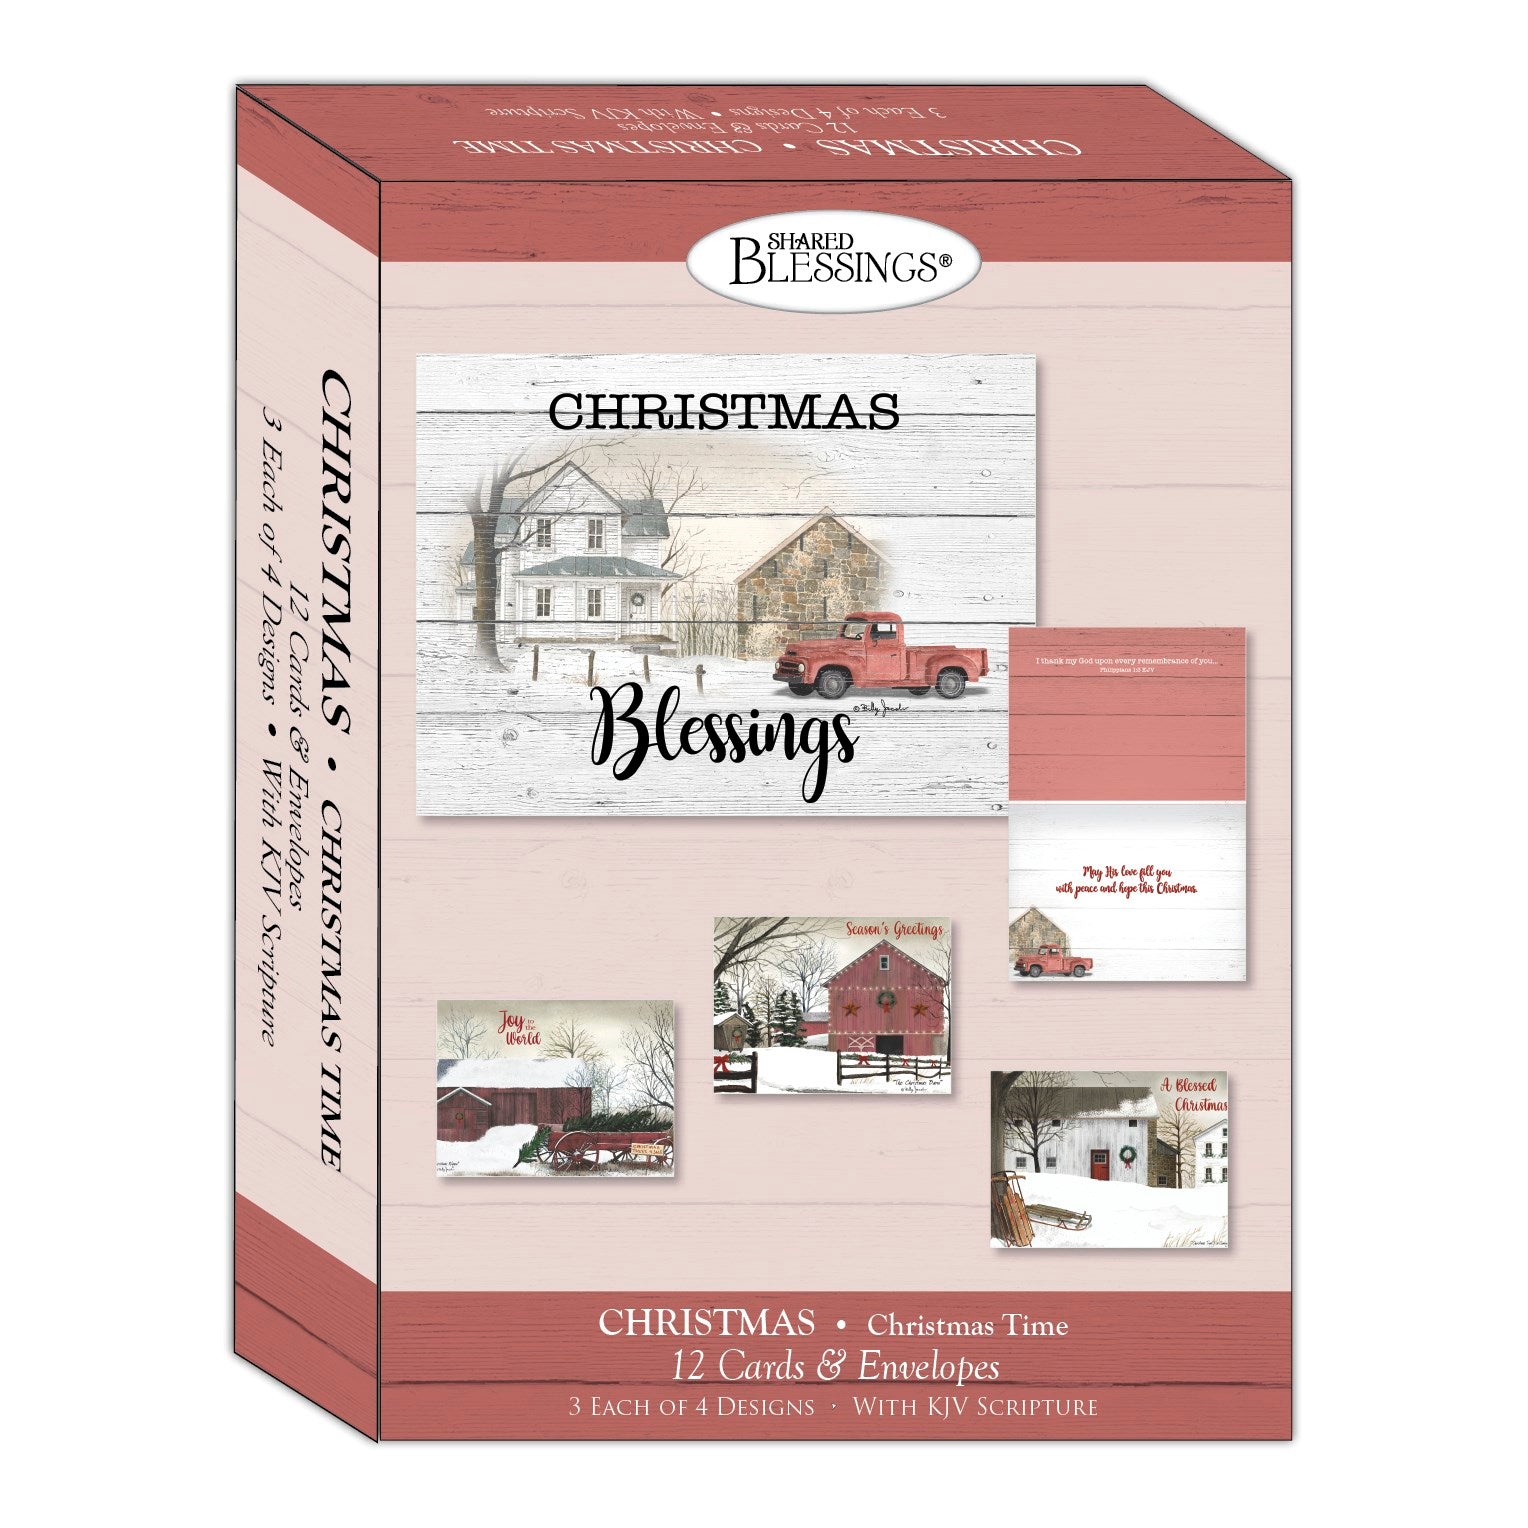 Seed of Abraham Christian Bookstore - (In)Courage - Card-Boxed-Shared Blessings-Christmas-Assorted/Christmas Time (Box Of 12)